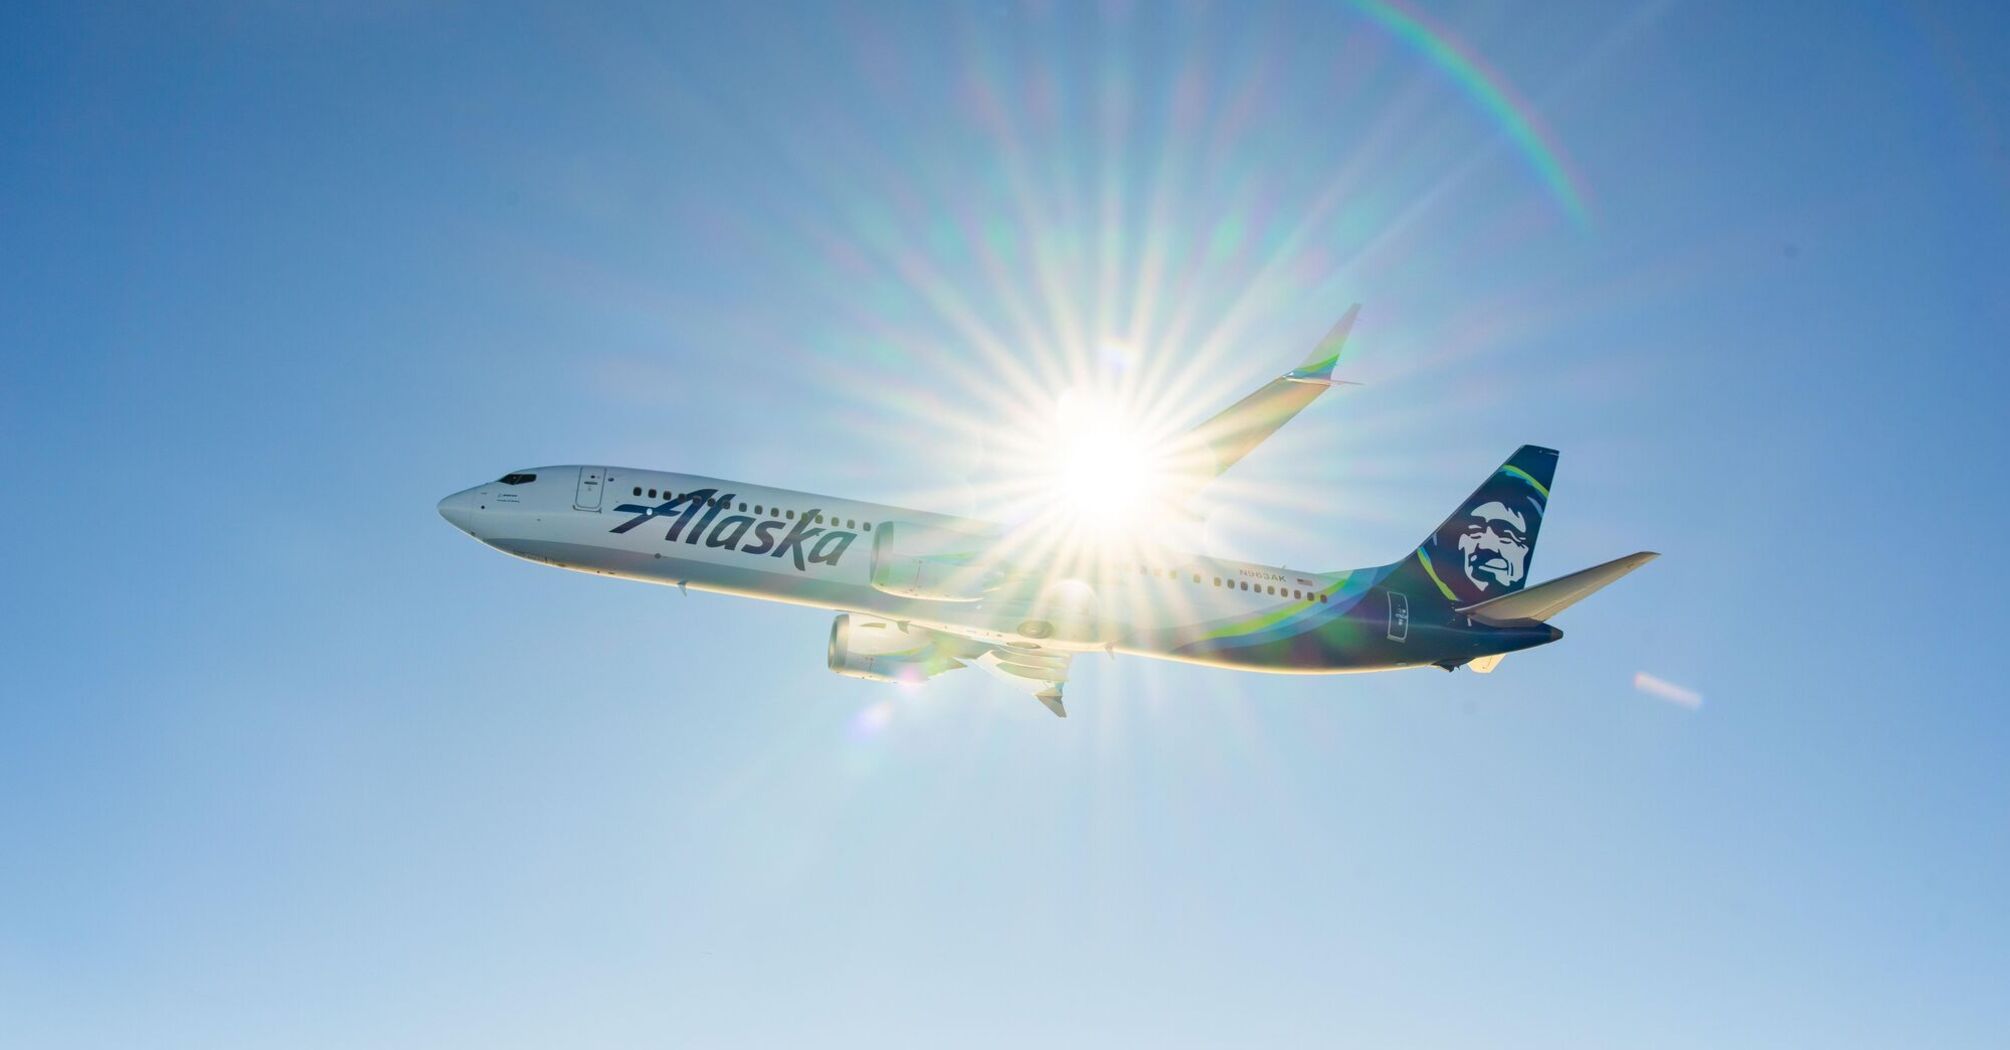 Alaska Airlines made an emergency landing, but the reason remains unknown